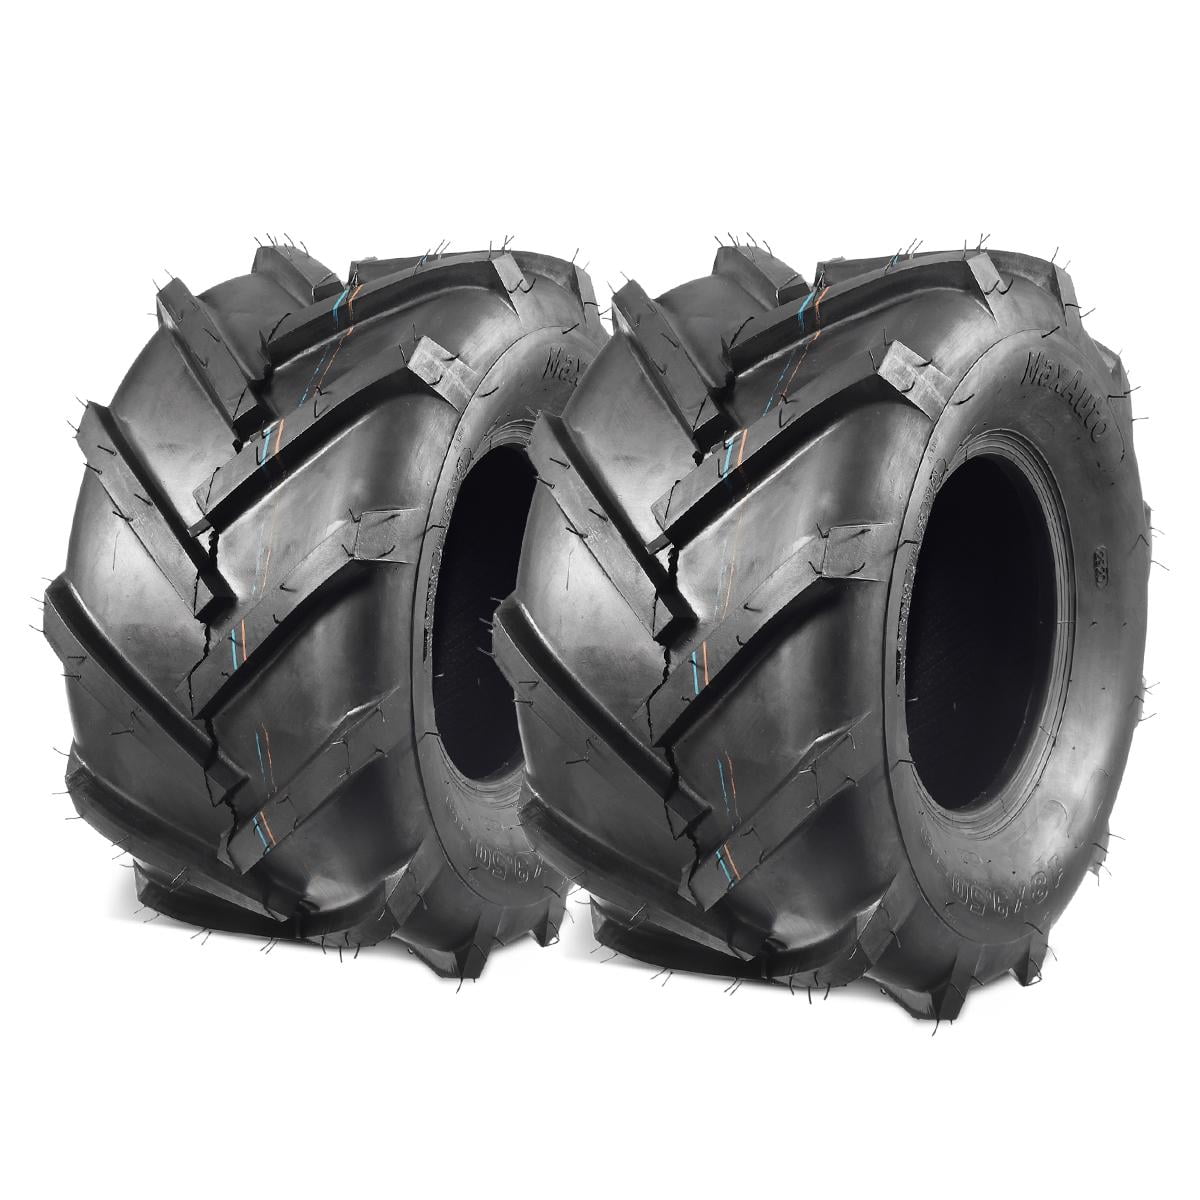 Carlisle 510101 20x10-8 Super Lug Lawn and Garden Tire for sale online 